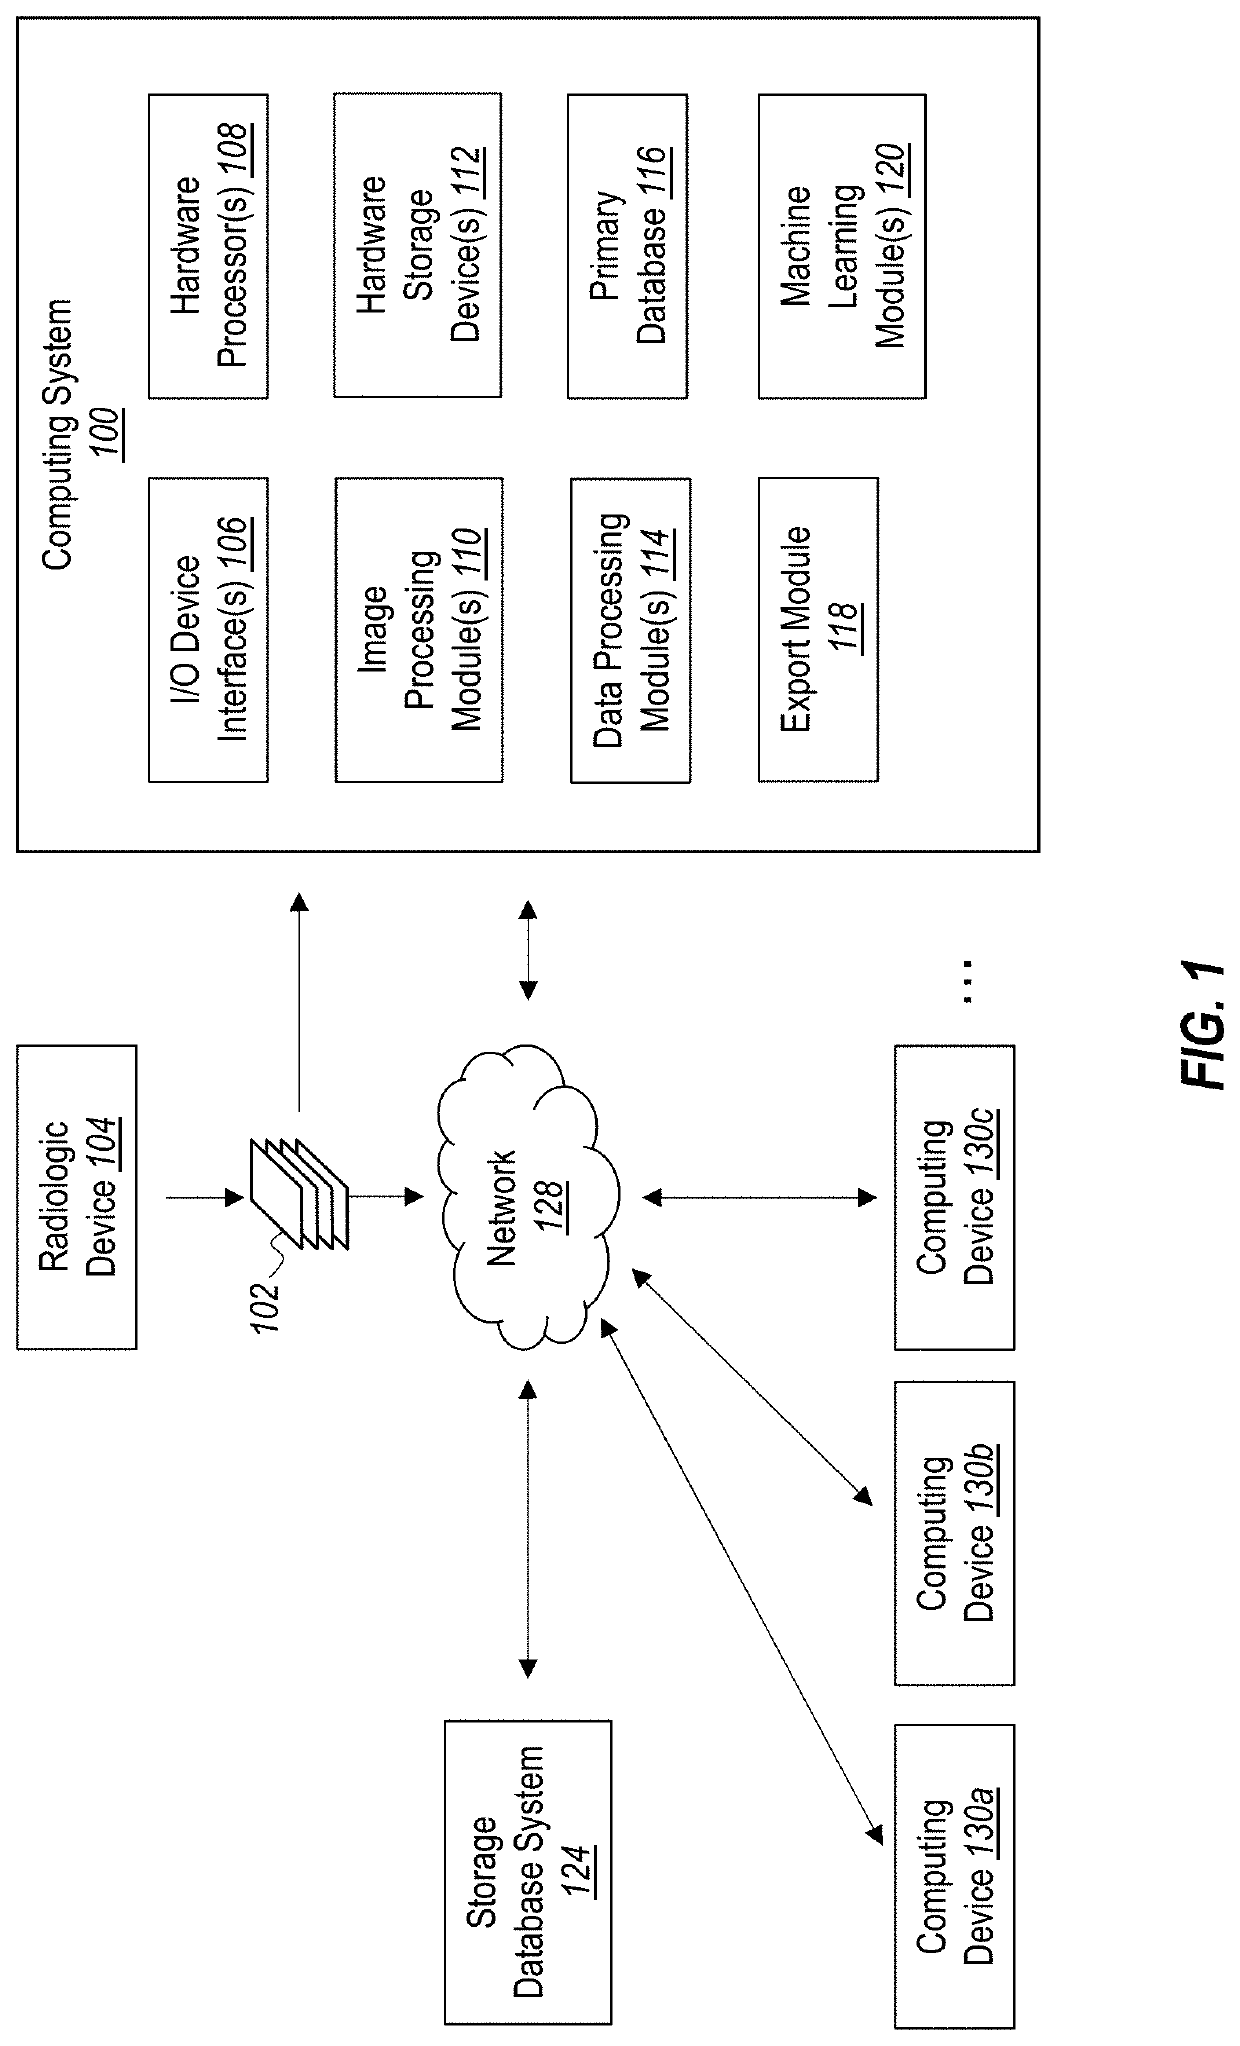 Systems and methods for lesion analysis